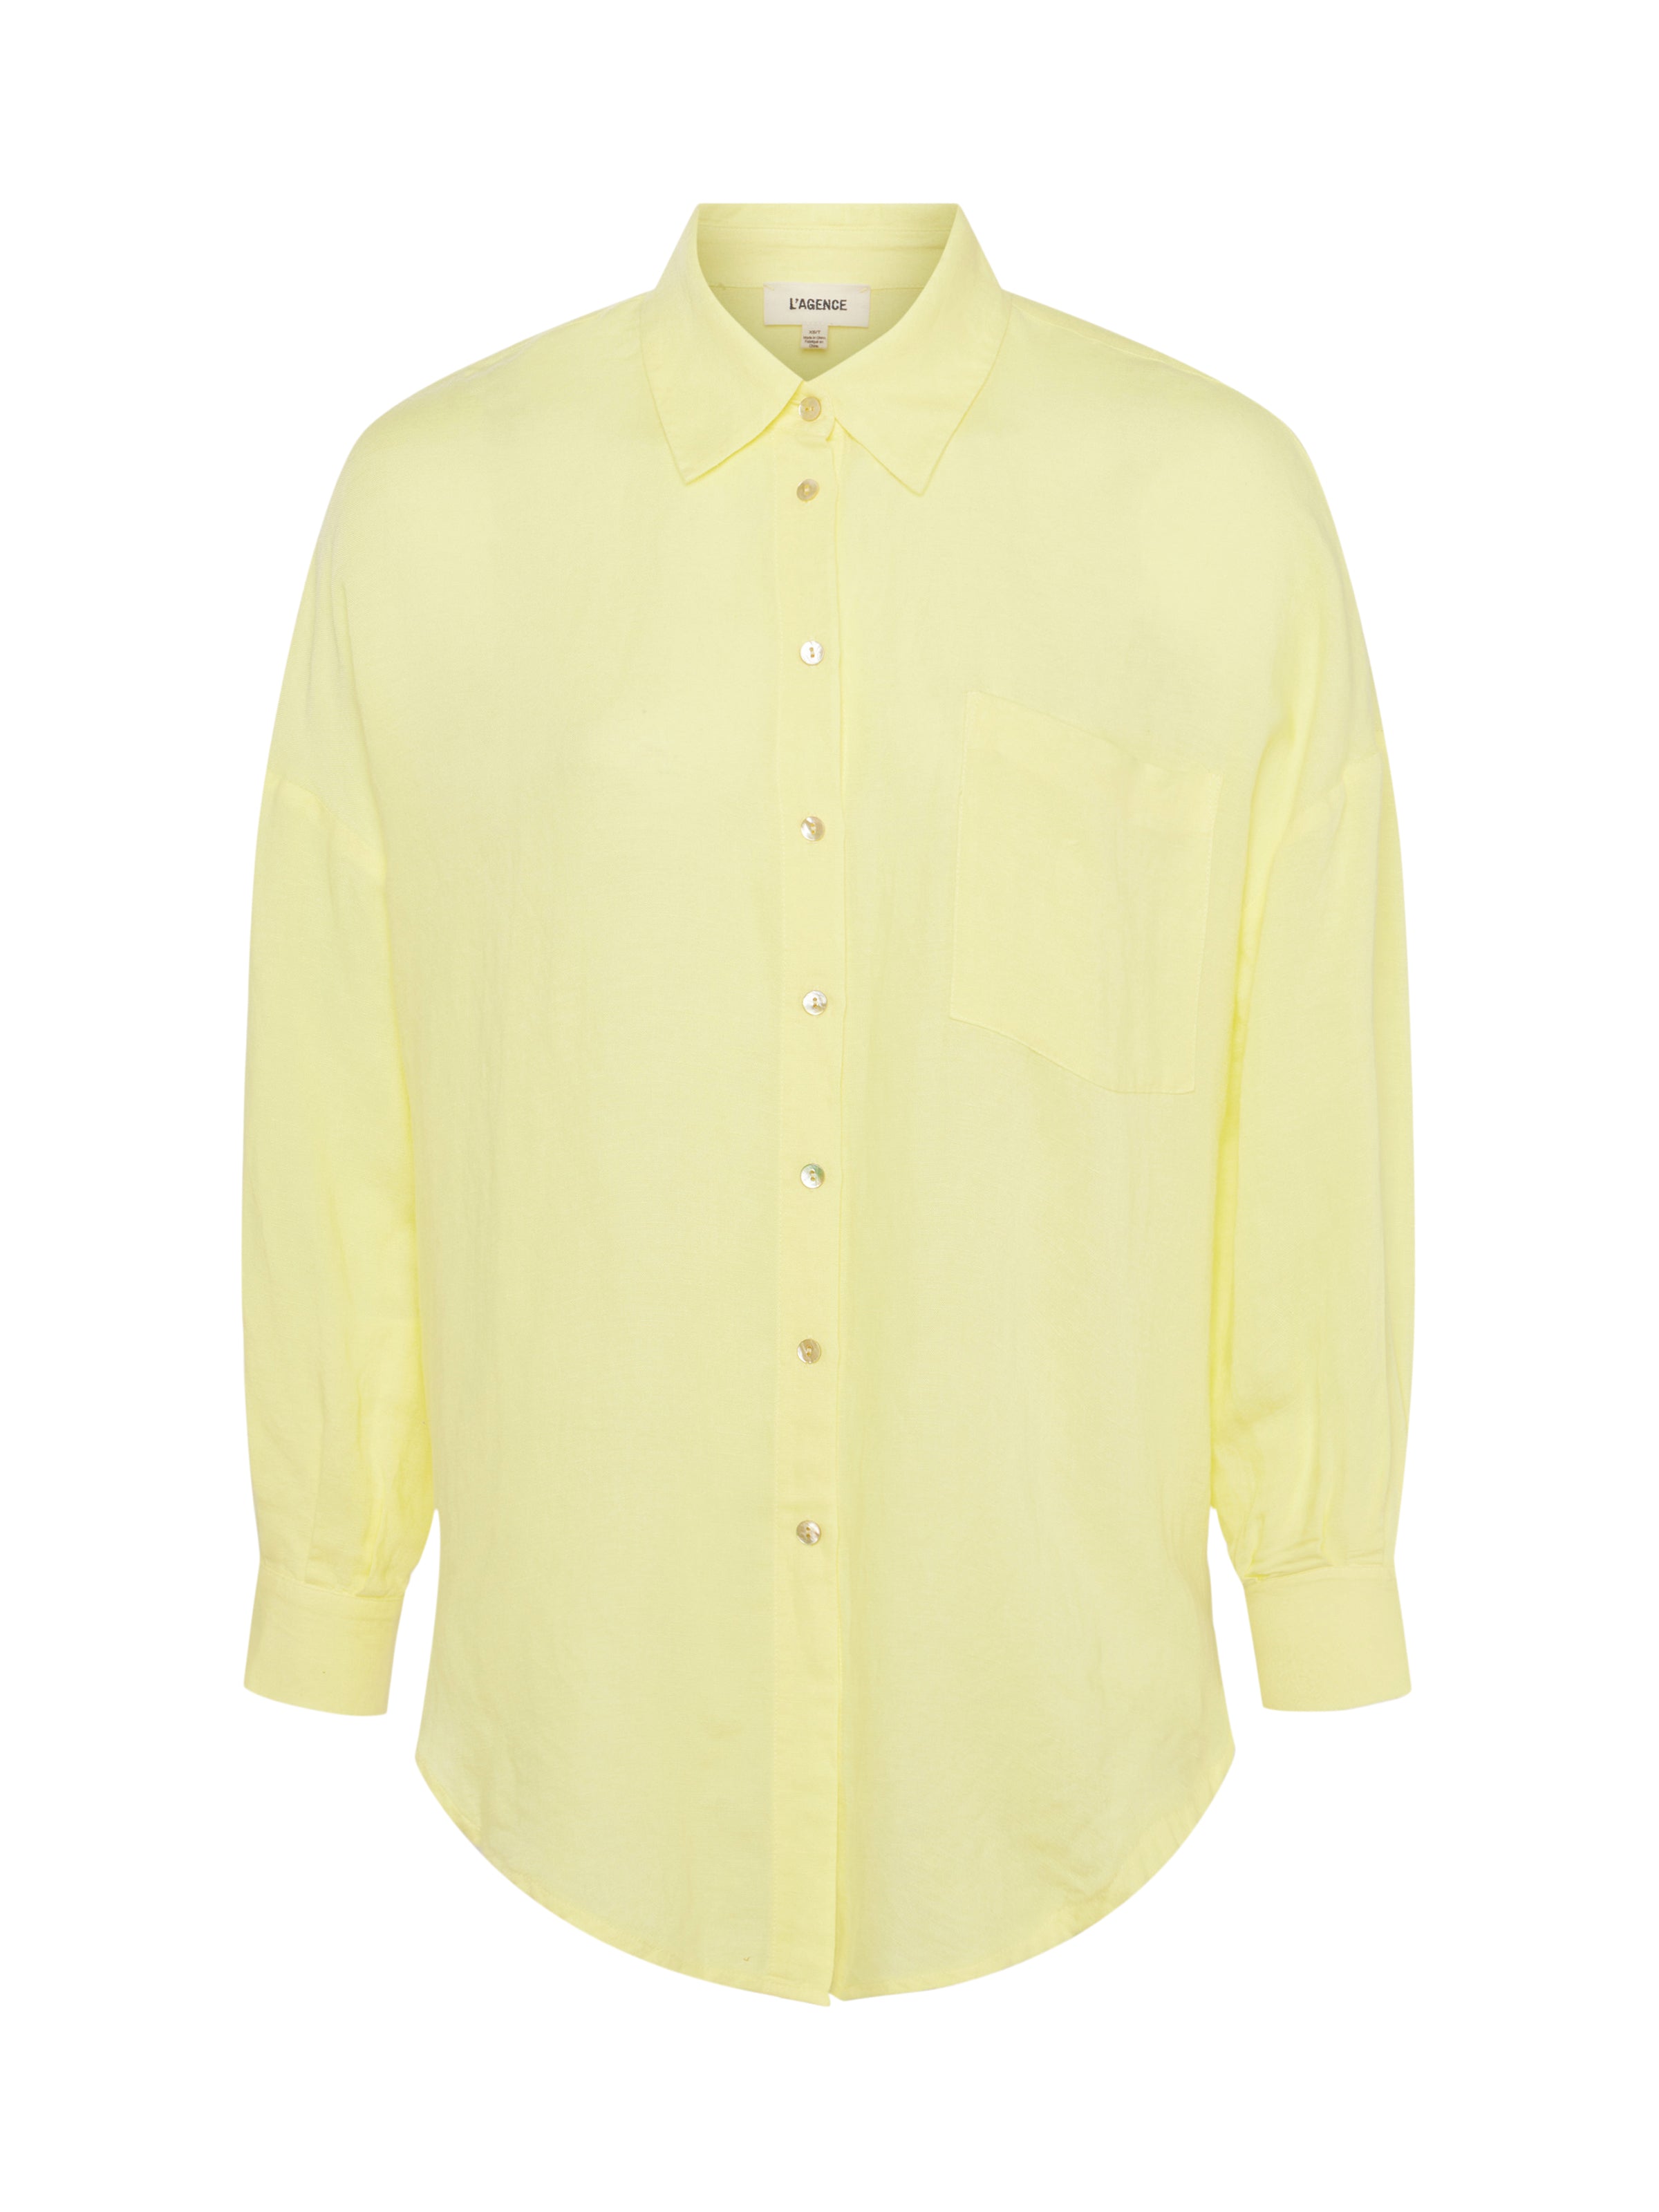 Talitha Tie Blouse in Yellow Sorbet